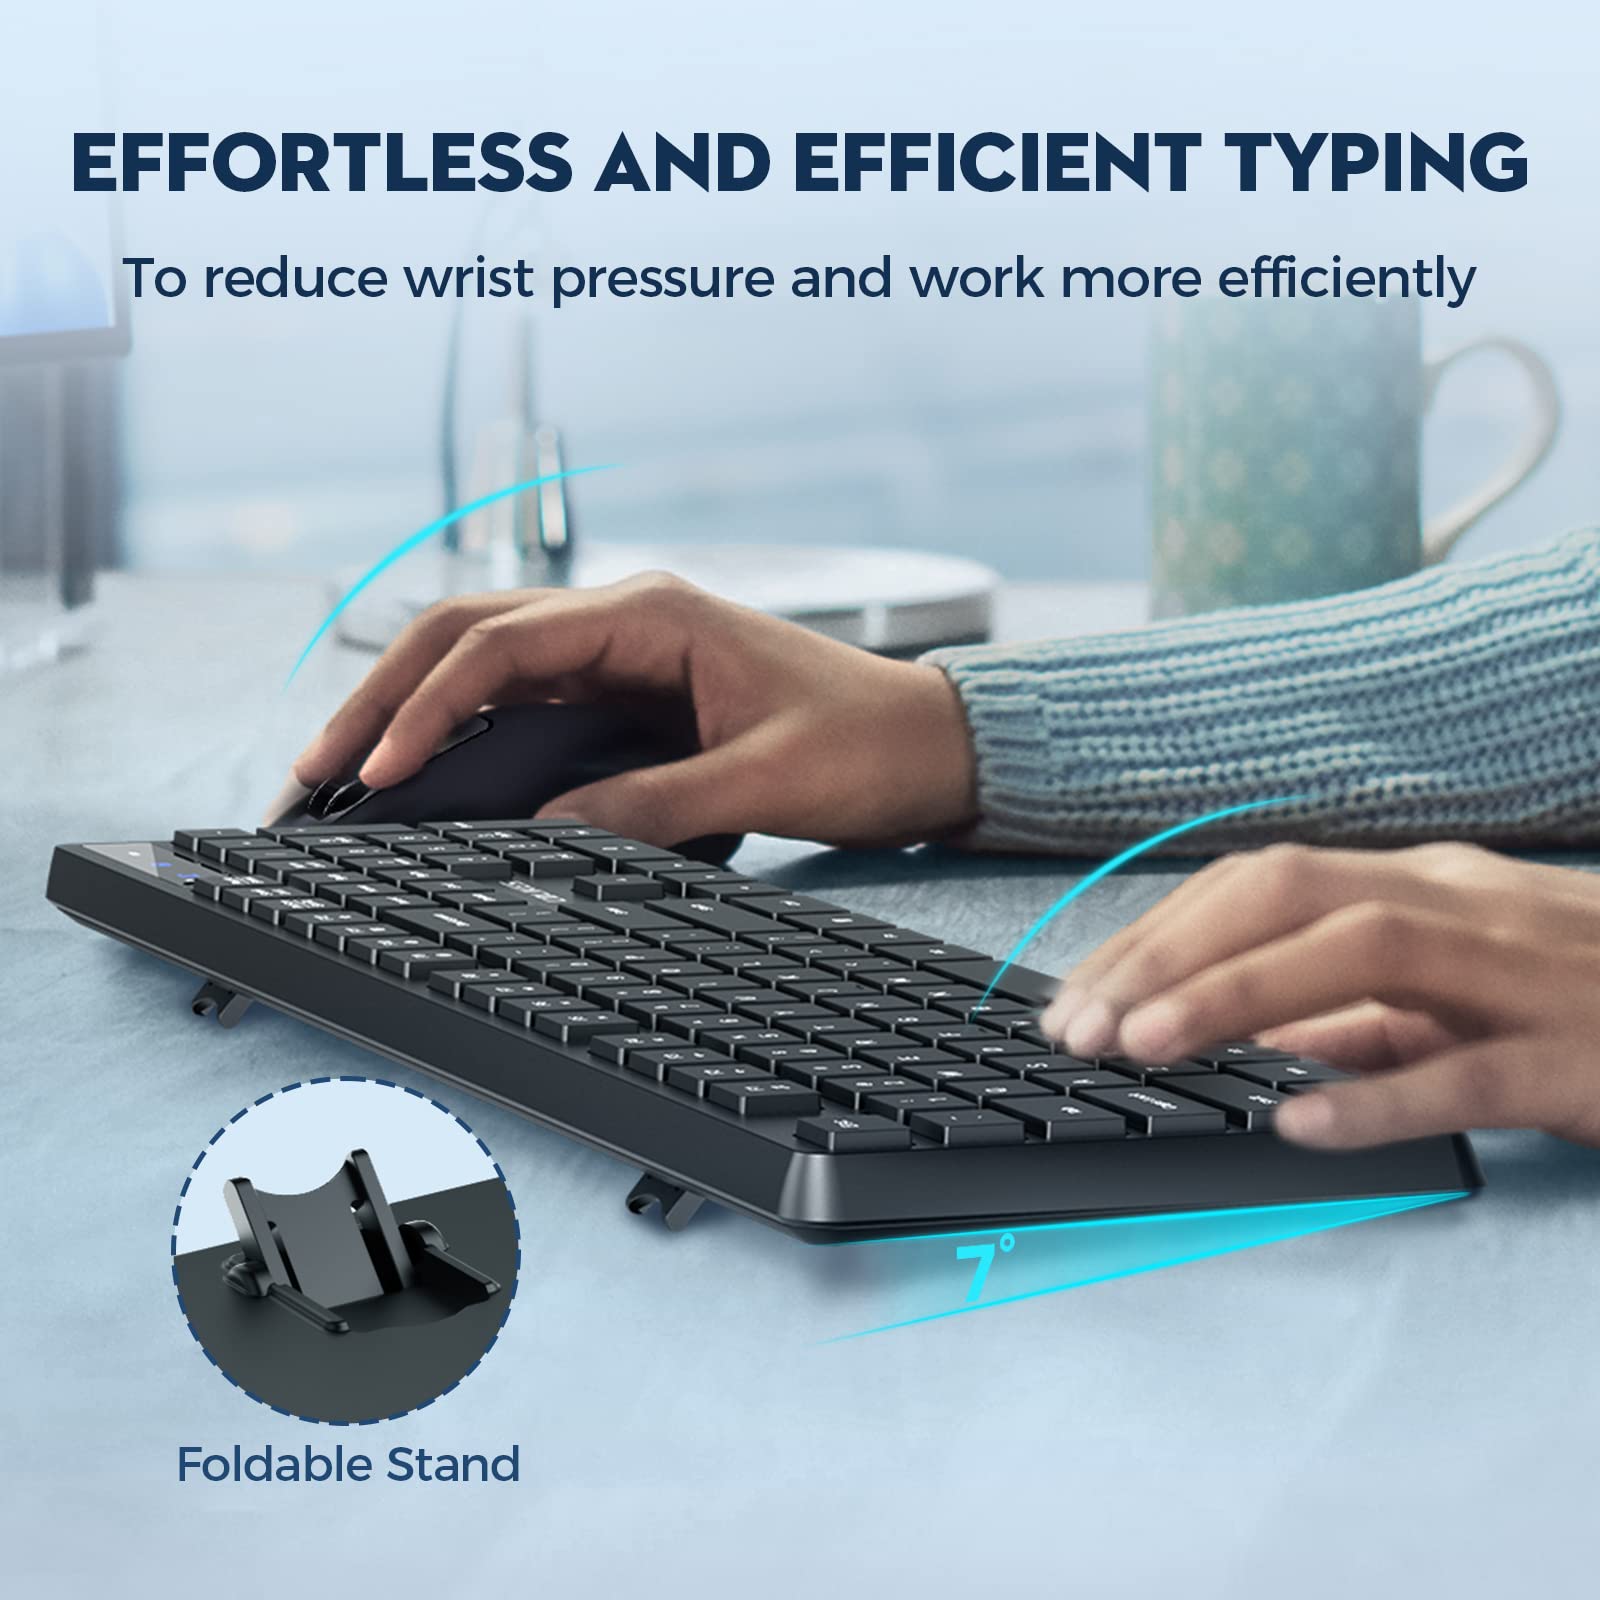 Wireless Keyboard and Mouse Combo, COLIKES 2.4G USB Cordless Keyboard Mouse Combo, 3 Level DPI Slim Ergonomic Mouse, Responsive Plug & Play for Computer Laptop PC - Full Size